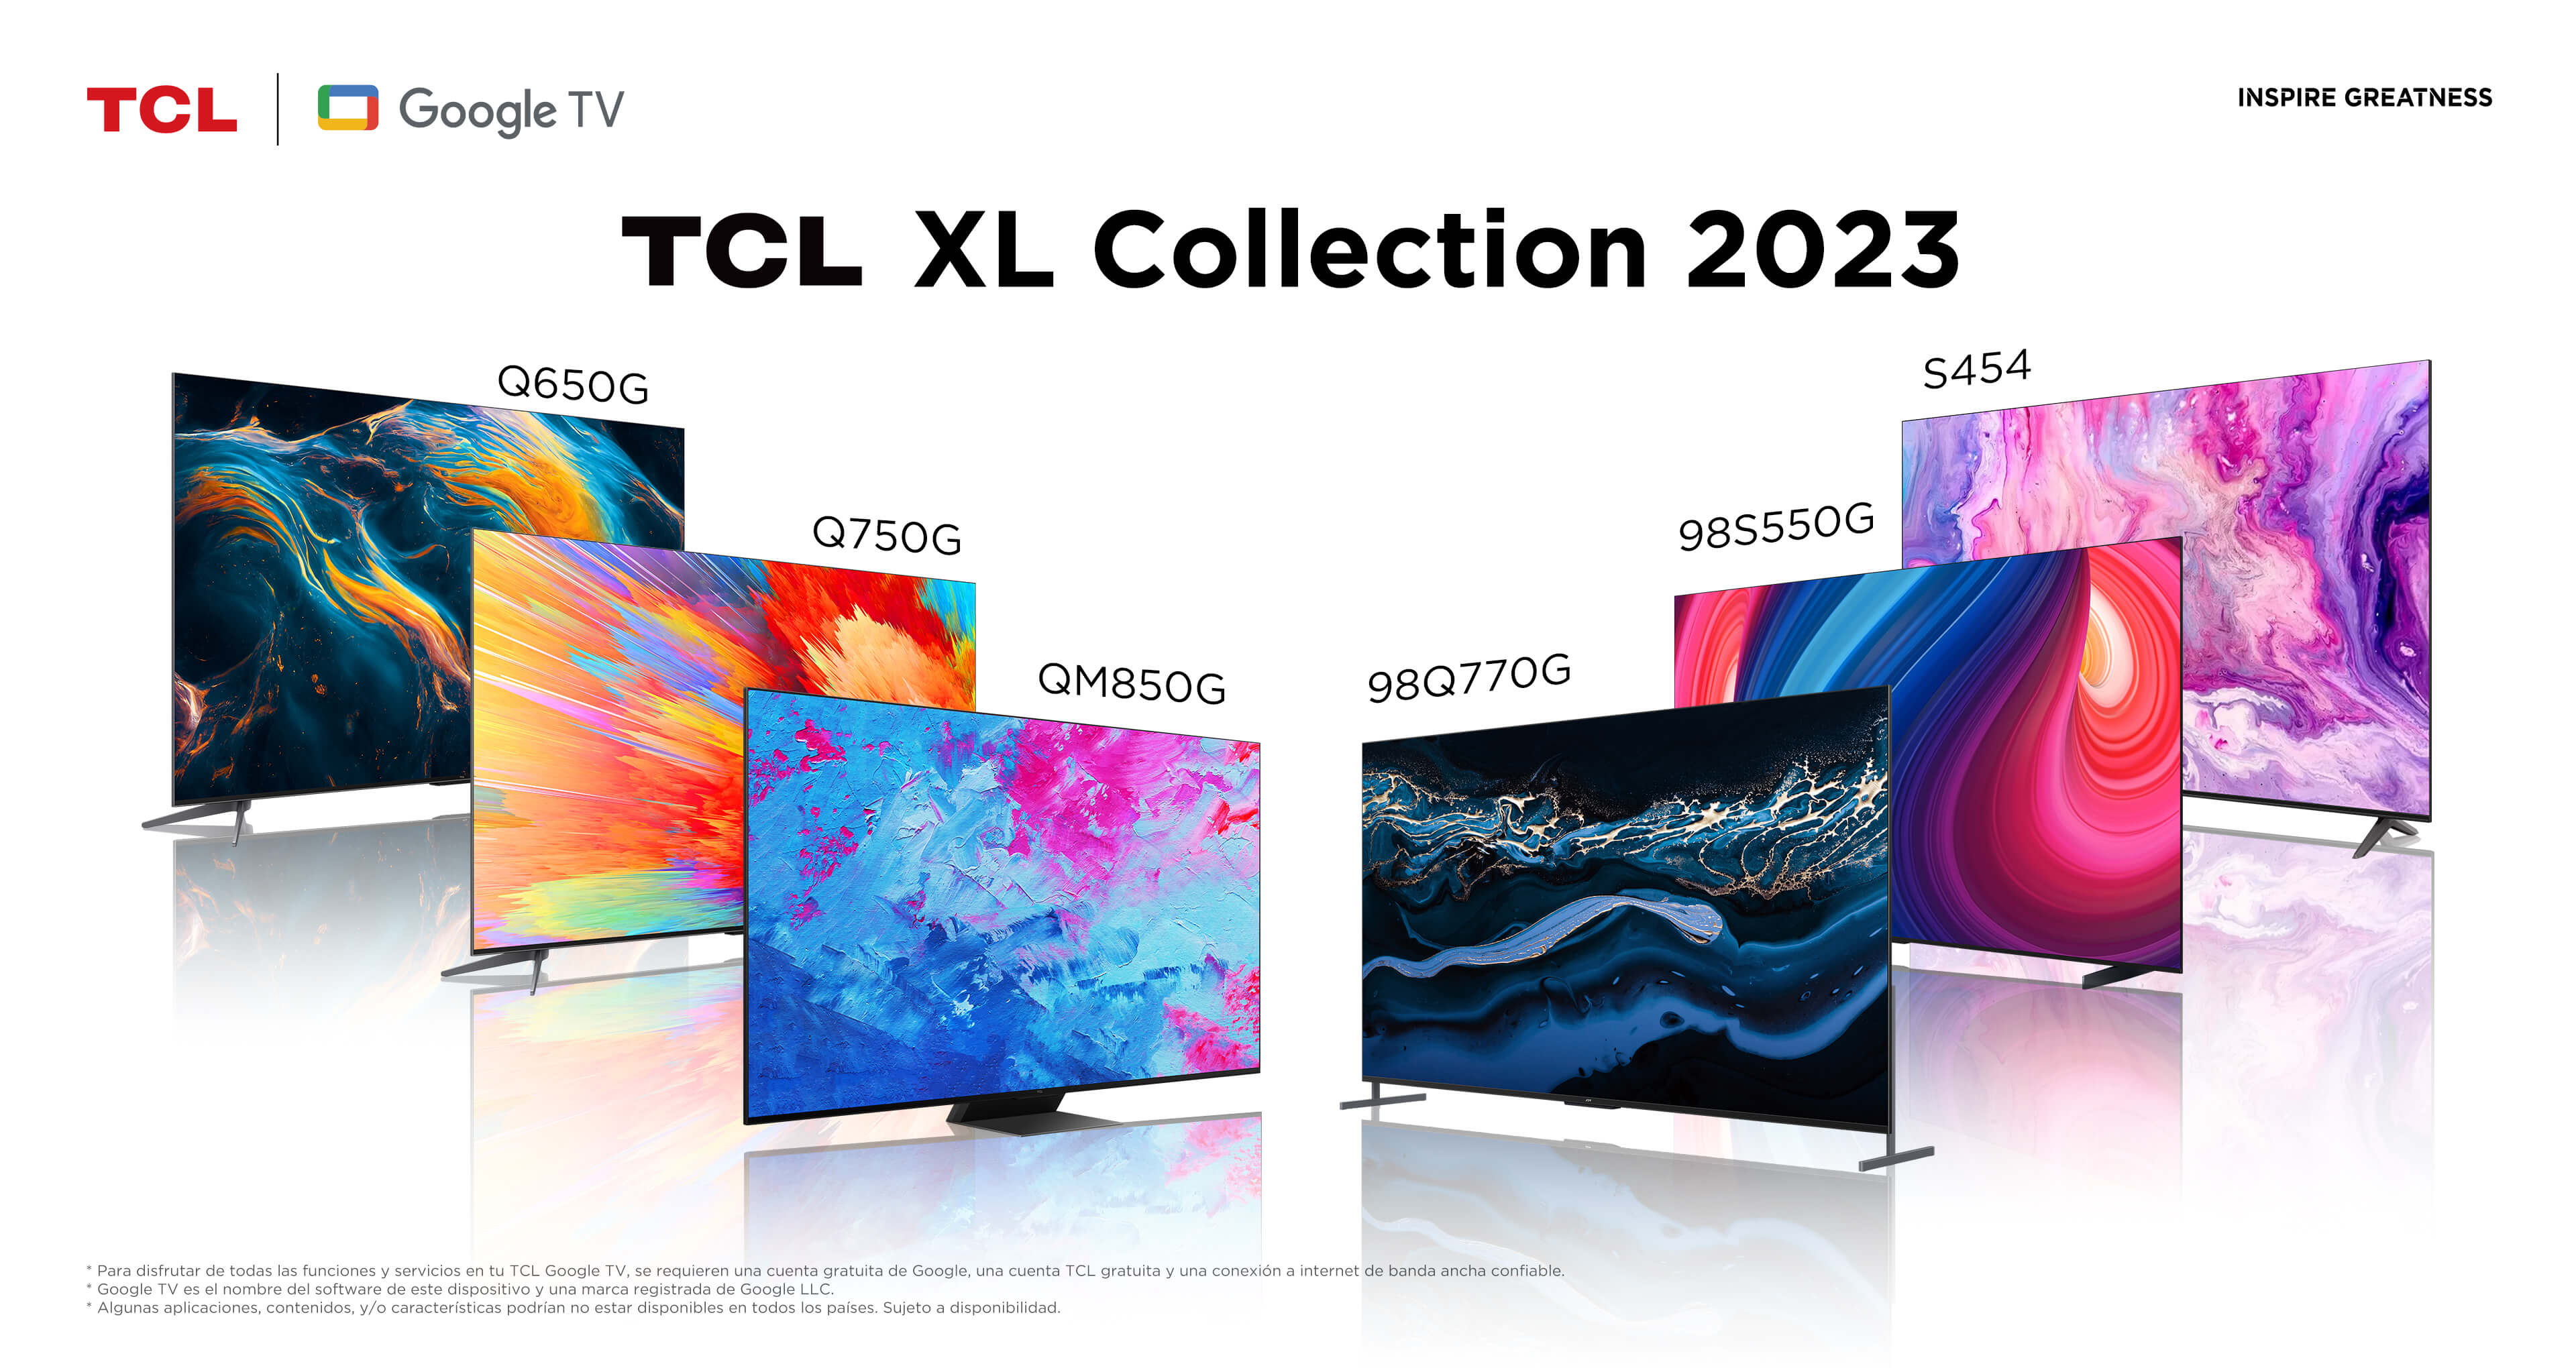 TCL XL Collection 2023